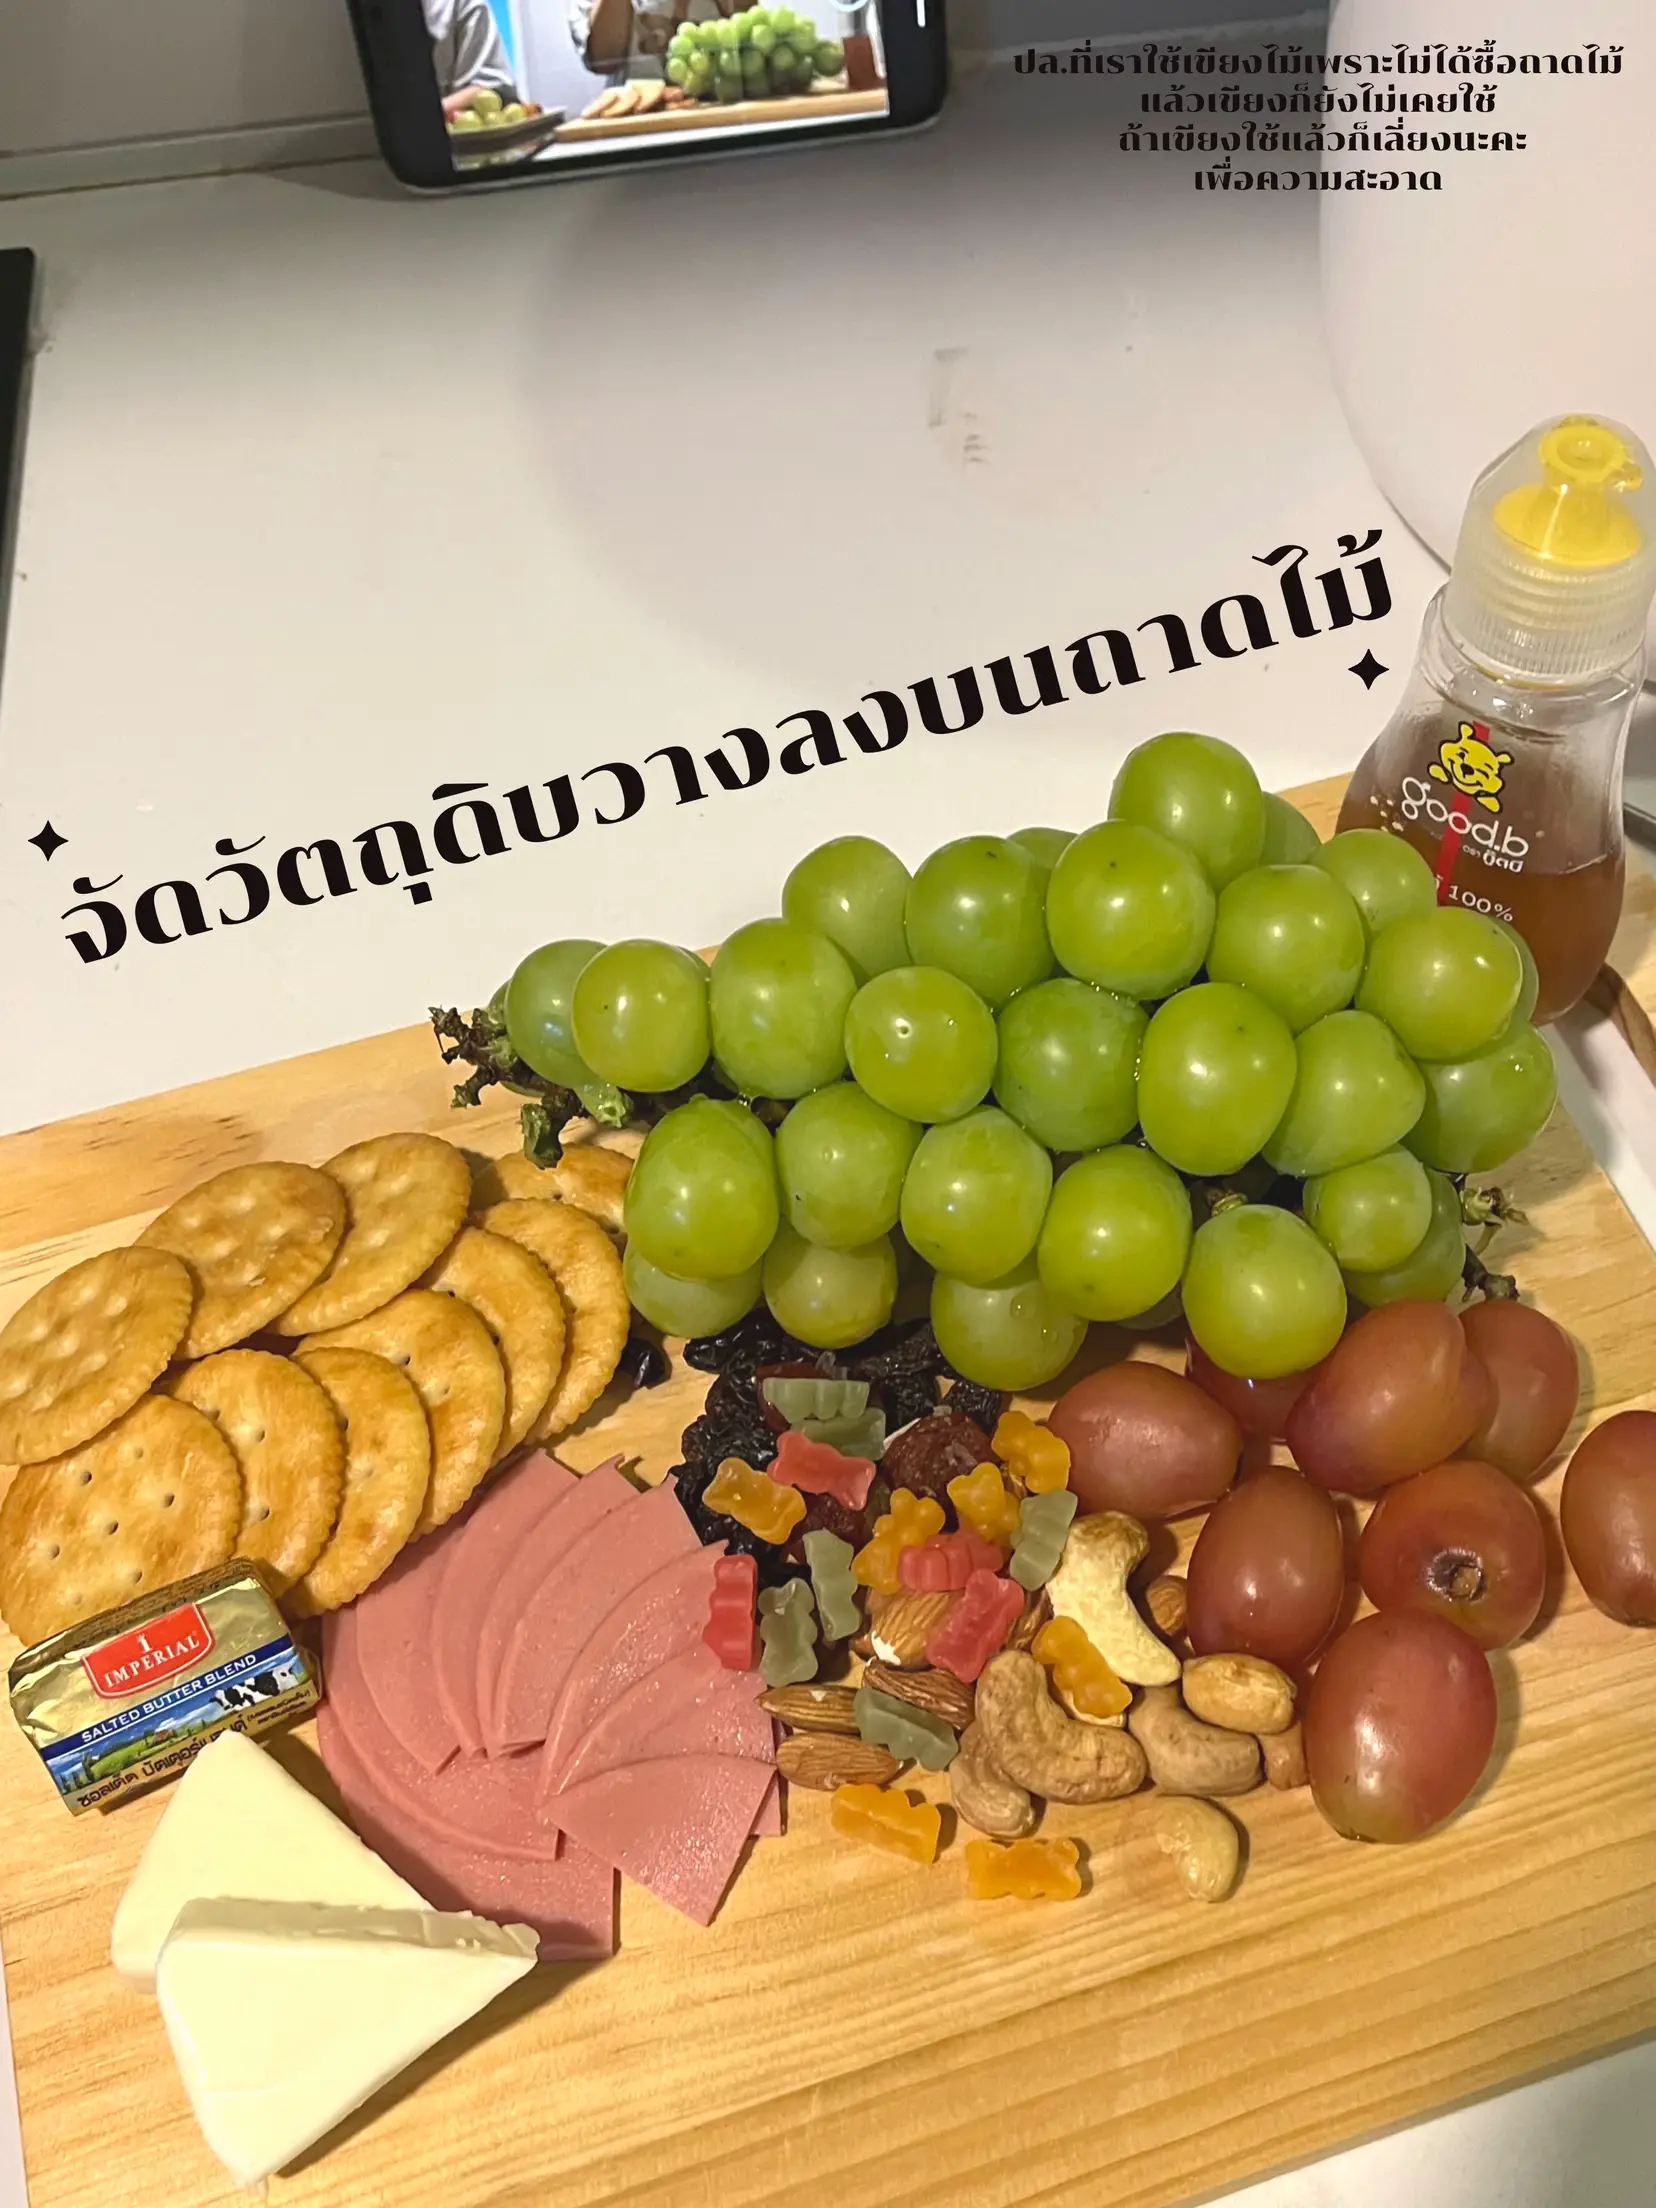 How to Make a Charcuterie Board - The Cookie Rookie®